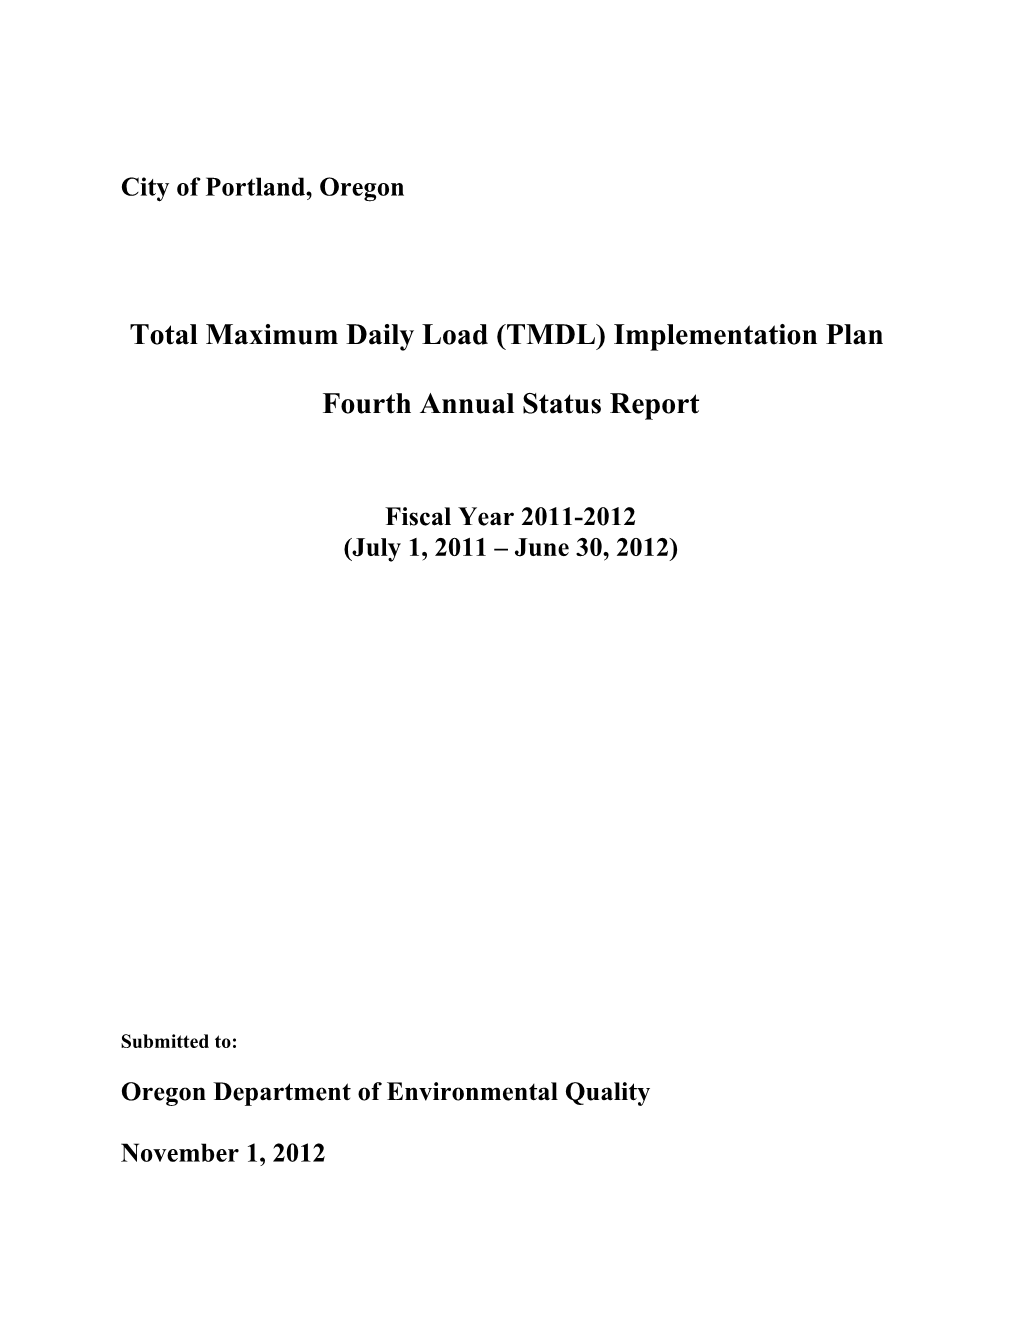 TMDL Implementation Plan Annual Report